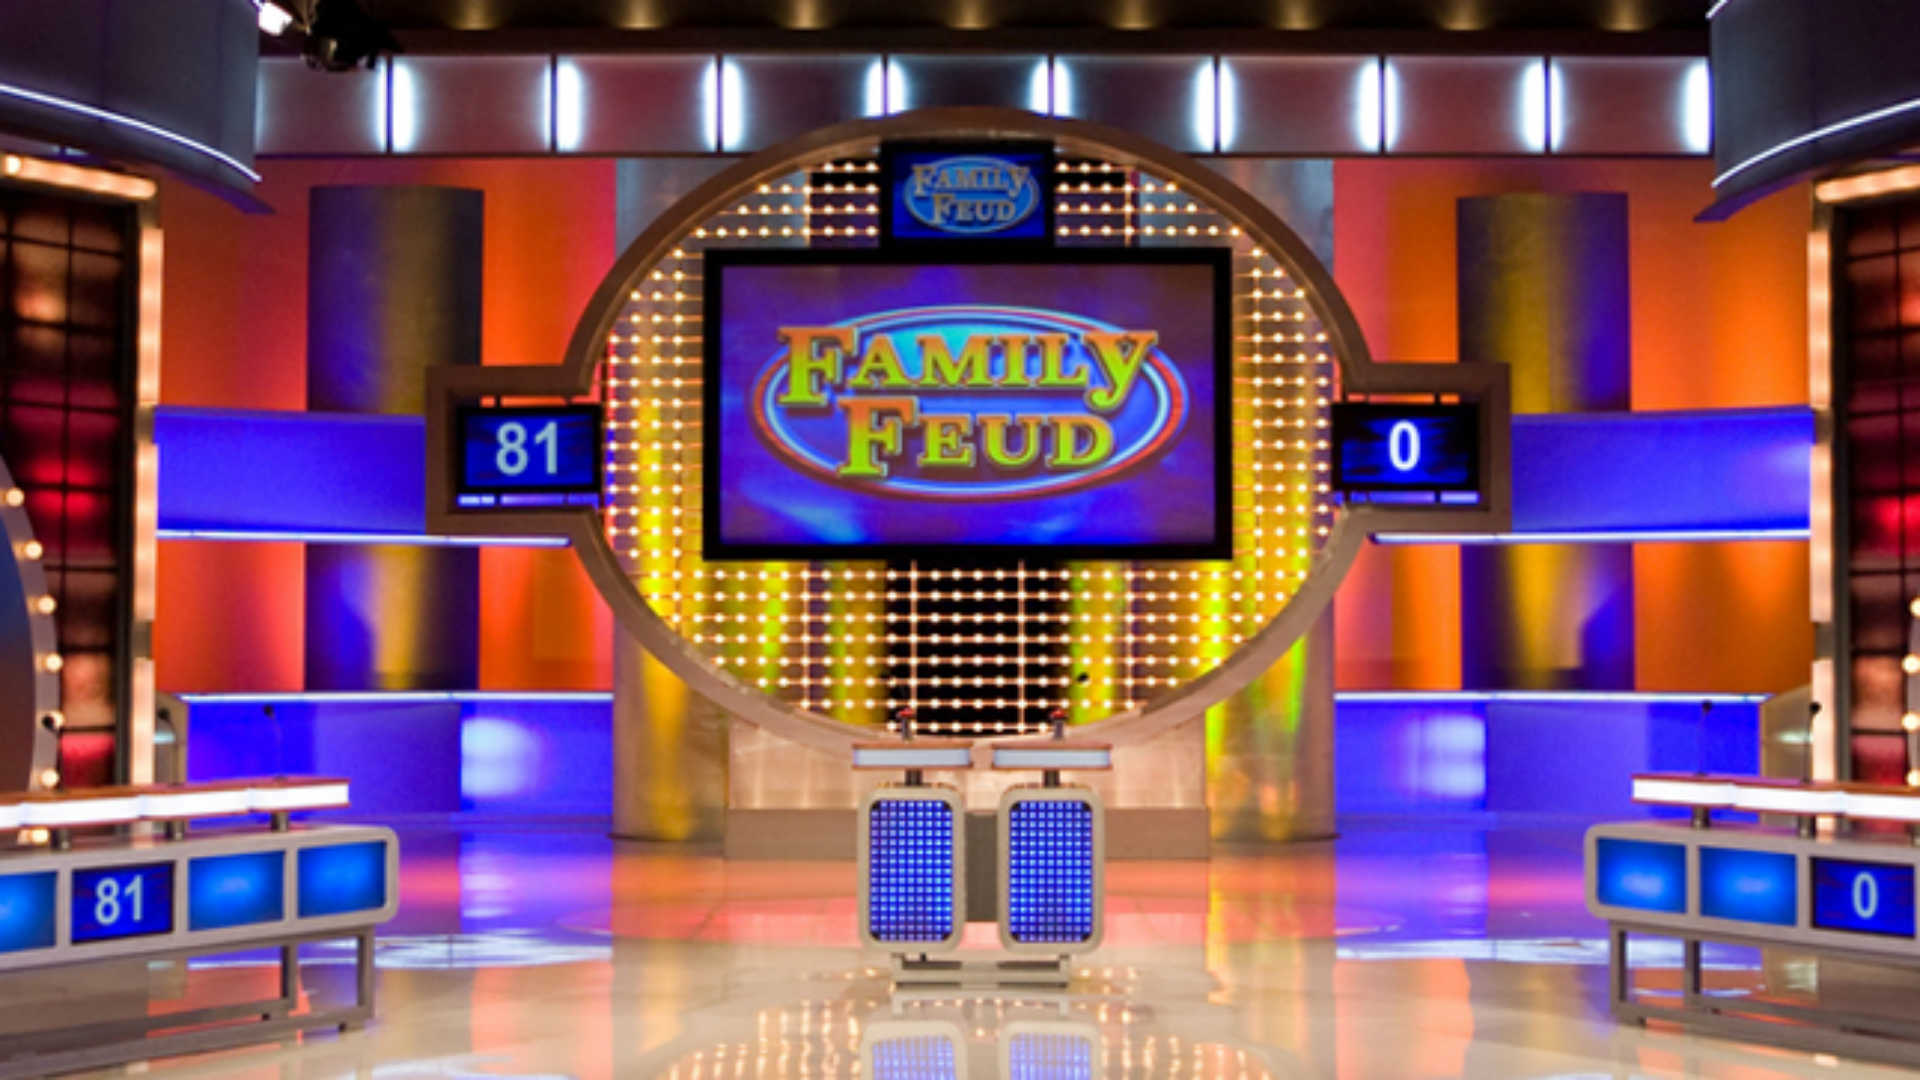 Family feud sets